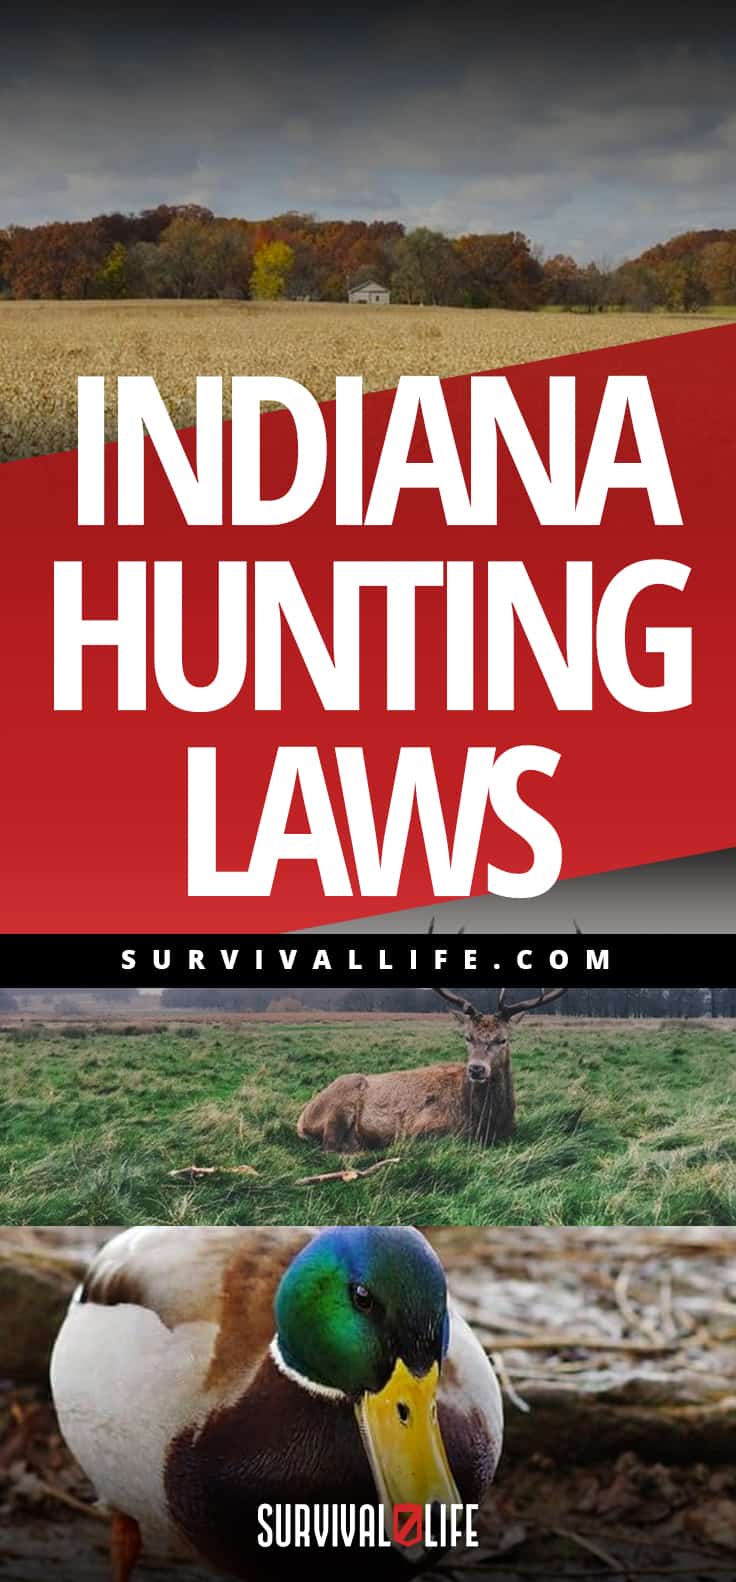 Indiana Hunting Laws